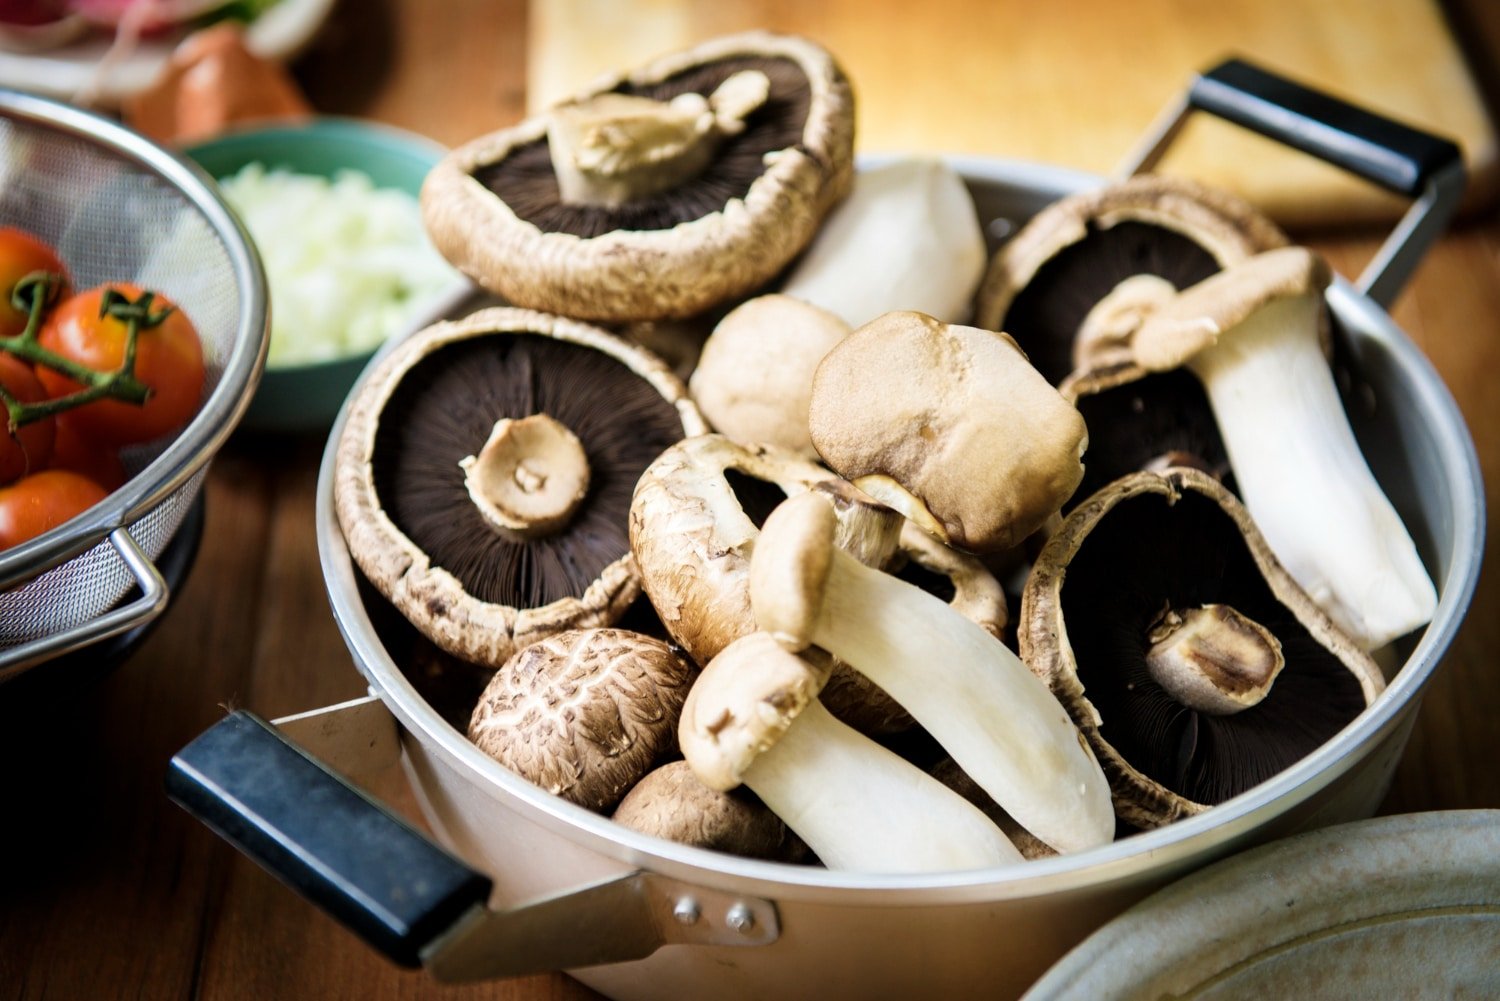 You are currently viewing Grow Your Own Mushrooms With MushroomSupplies.com’s Cultivation Kits